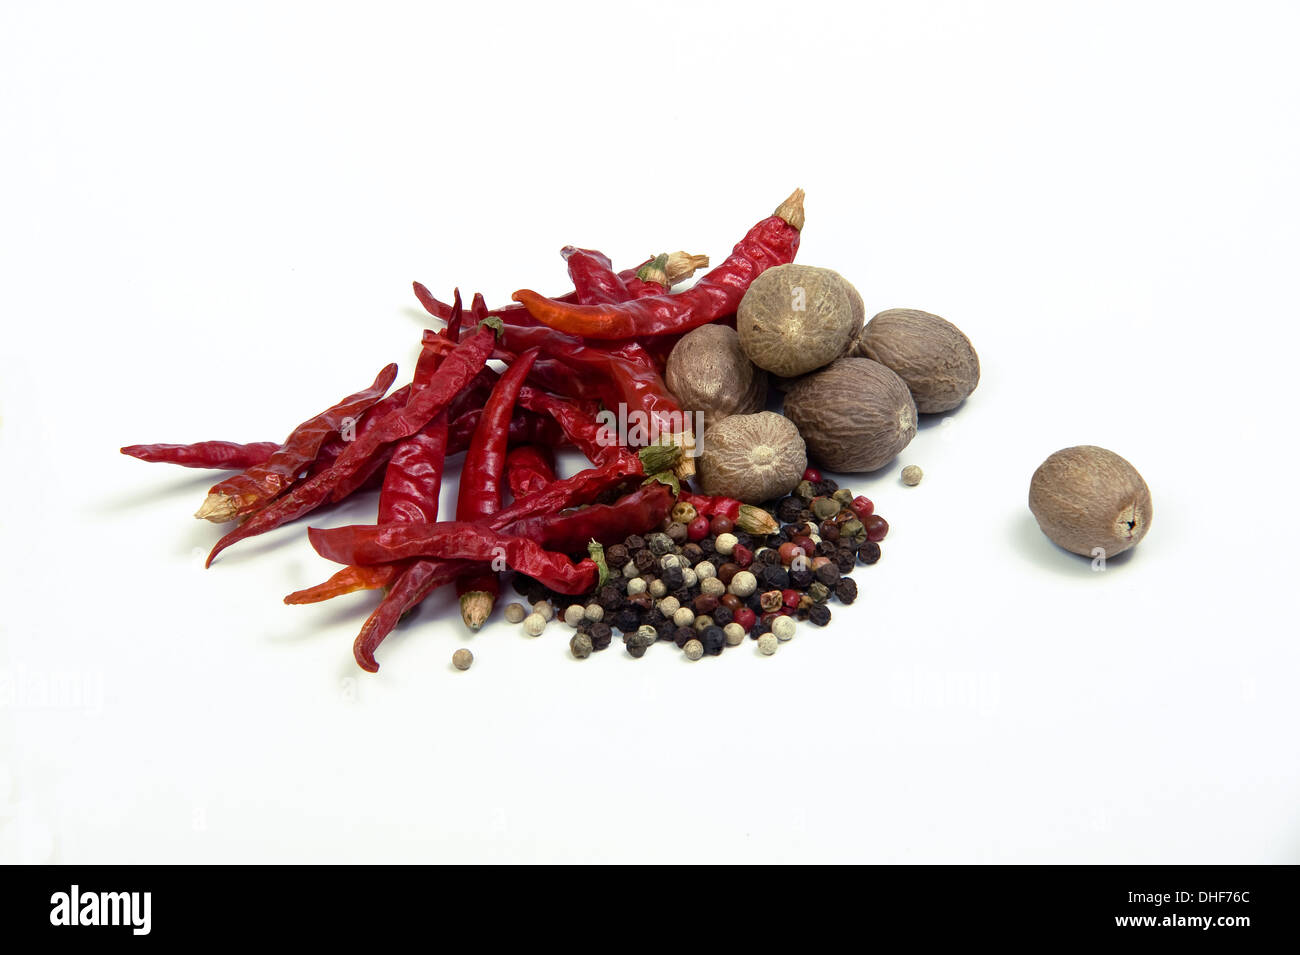 Peppers and nutmegs Stock Photo